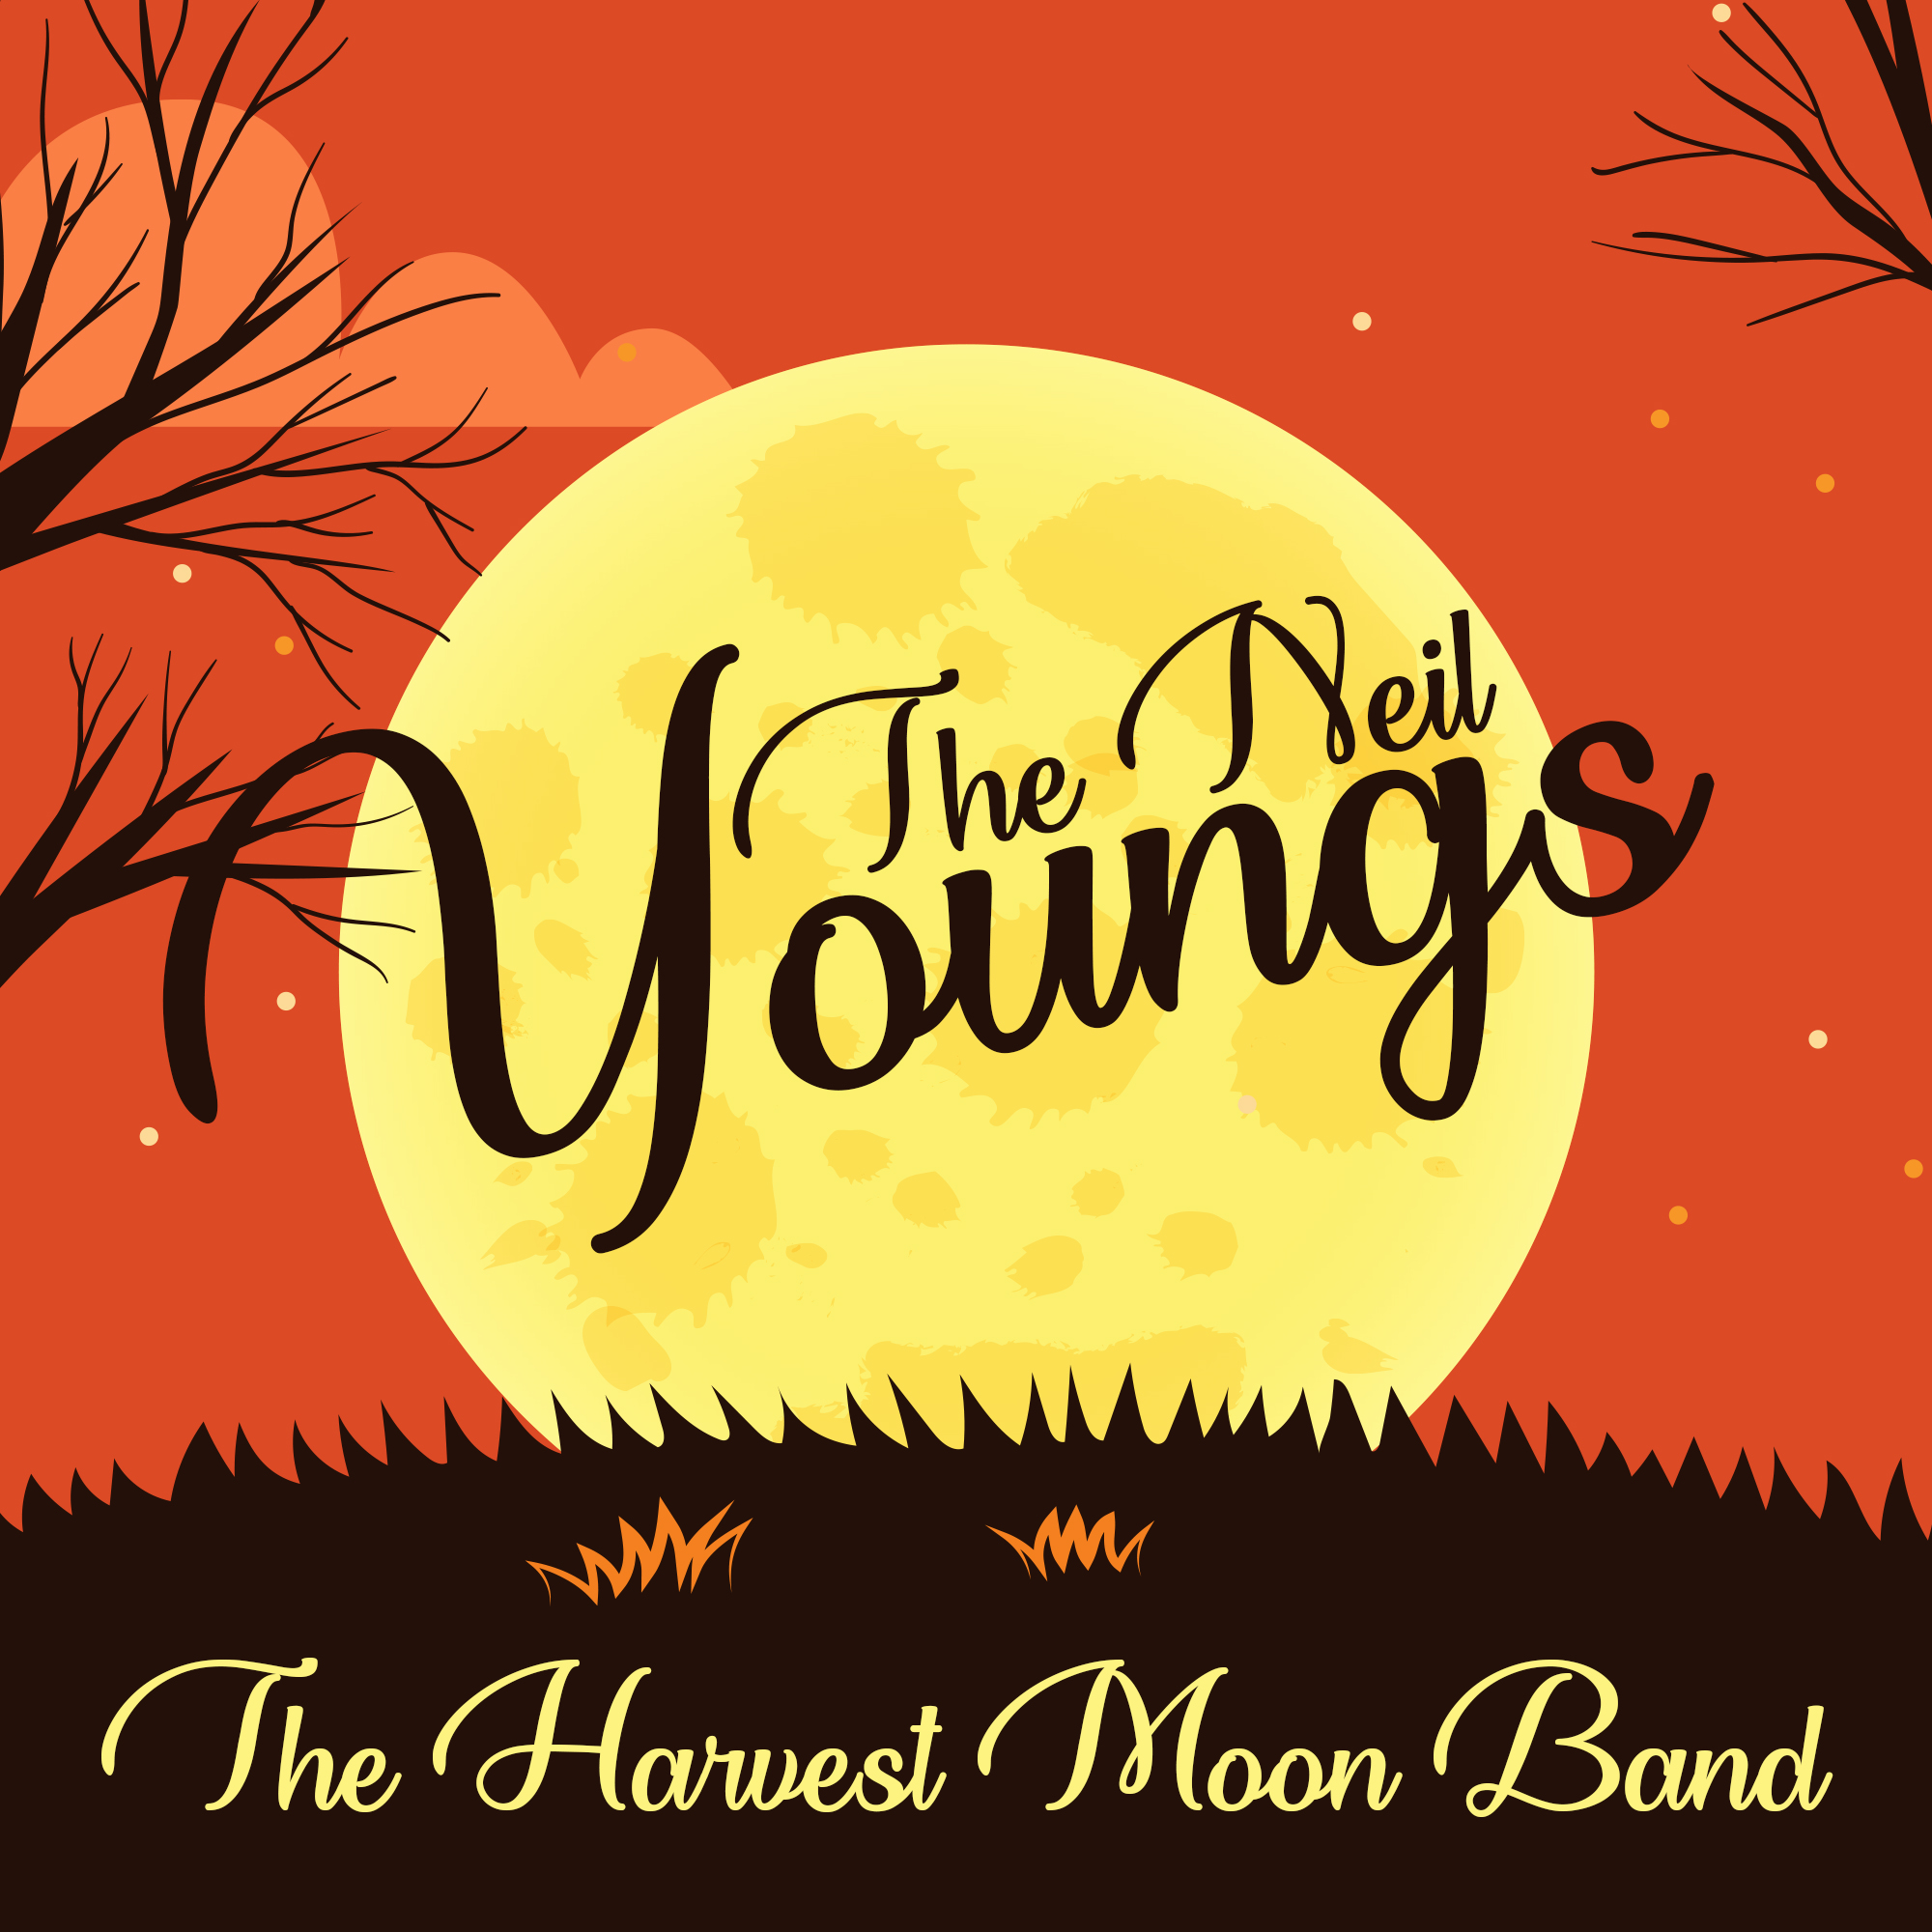 Neil Young Tribute Band